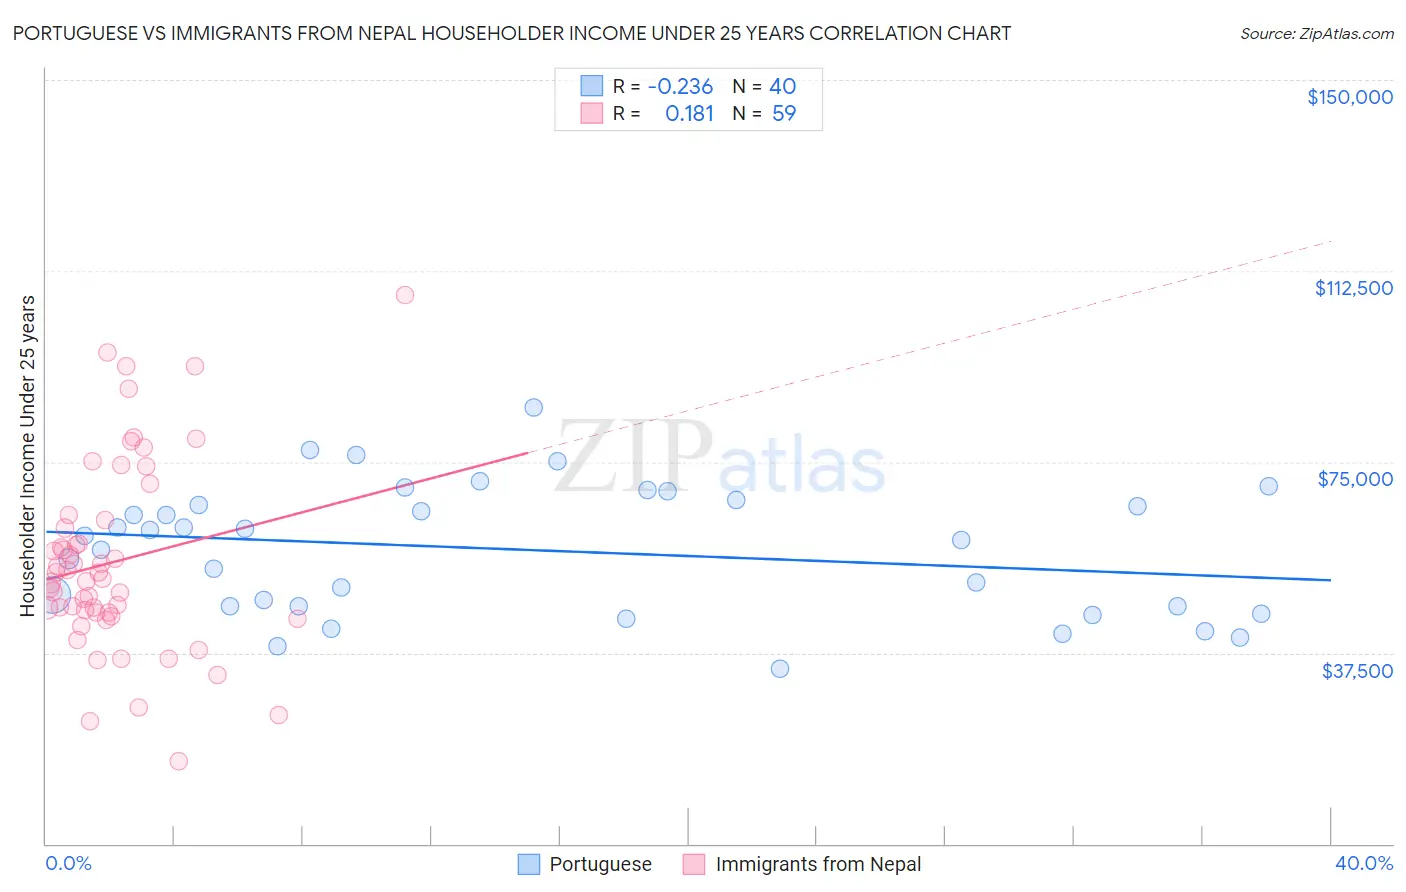 Portuguese vs Immigrants from Nepal Householder Income Under 25 years